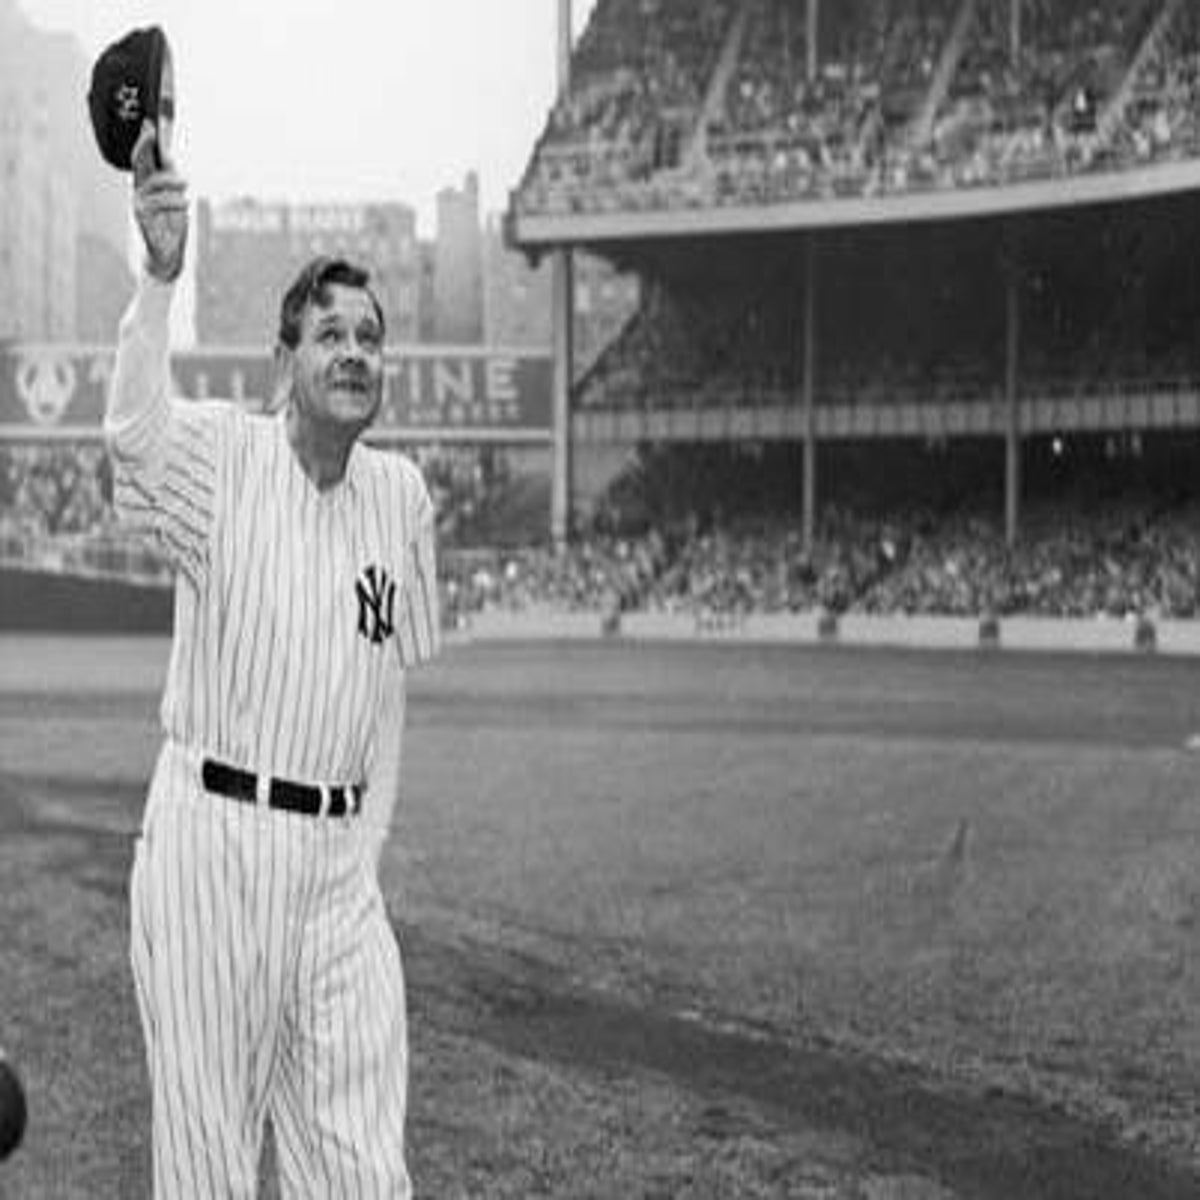 Babe Ruth's jersey sold at auction for record-breaking $5.6